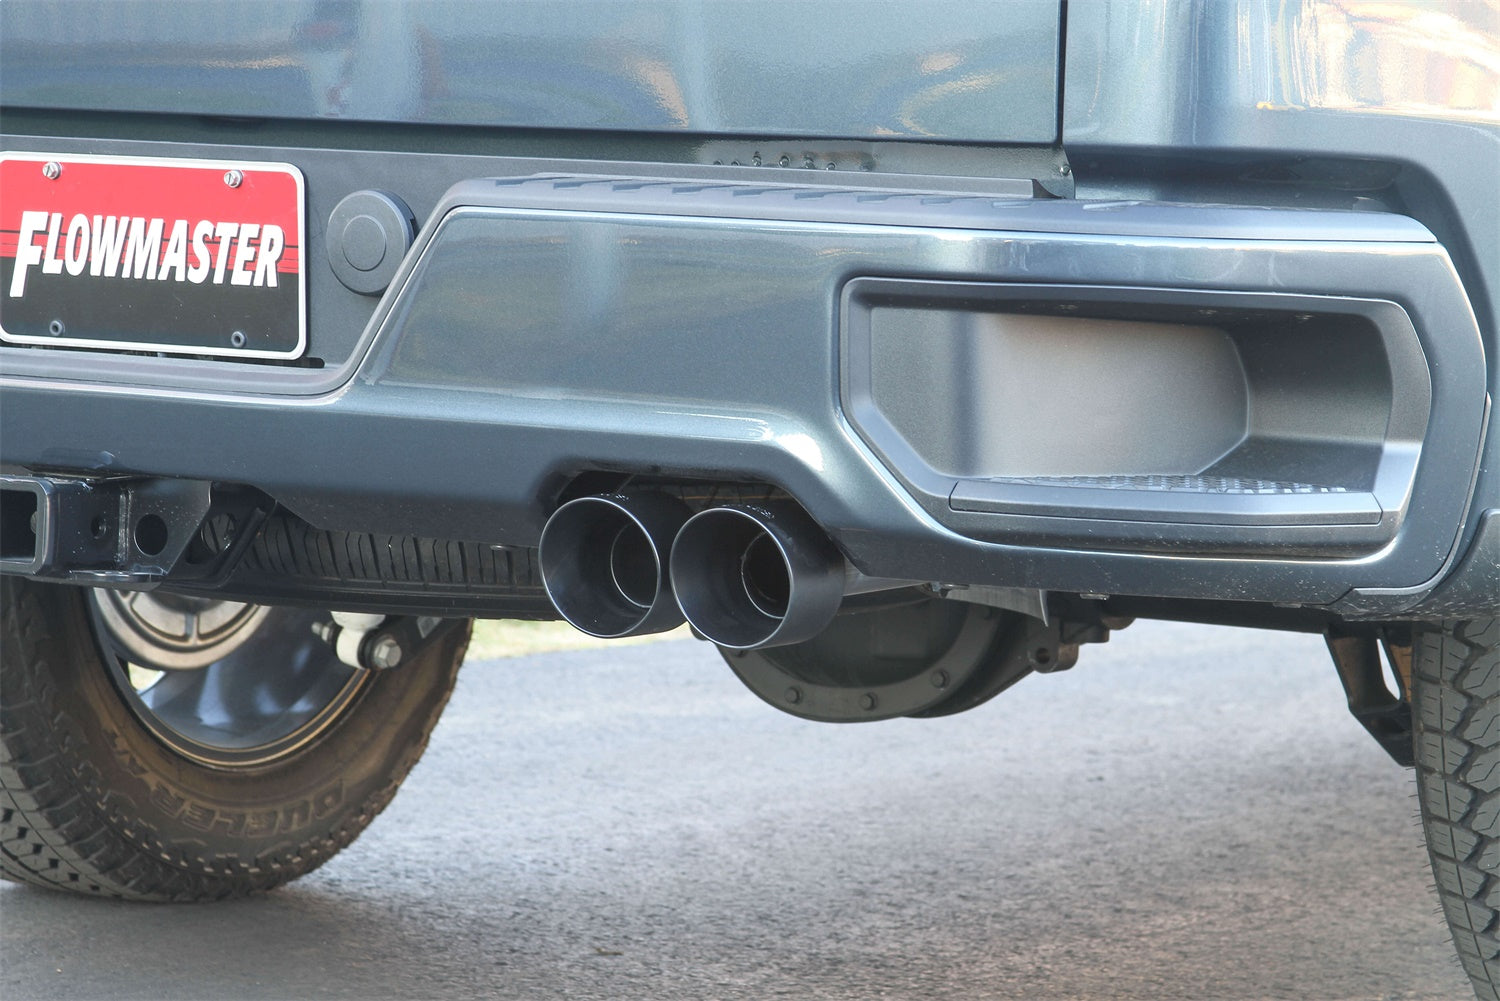 Flowmaster 817895 American Thunder Cat Back Exhaust System